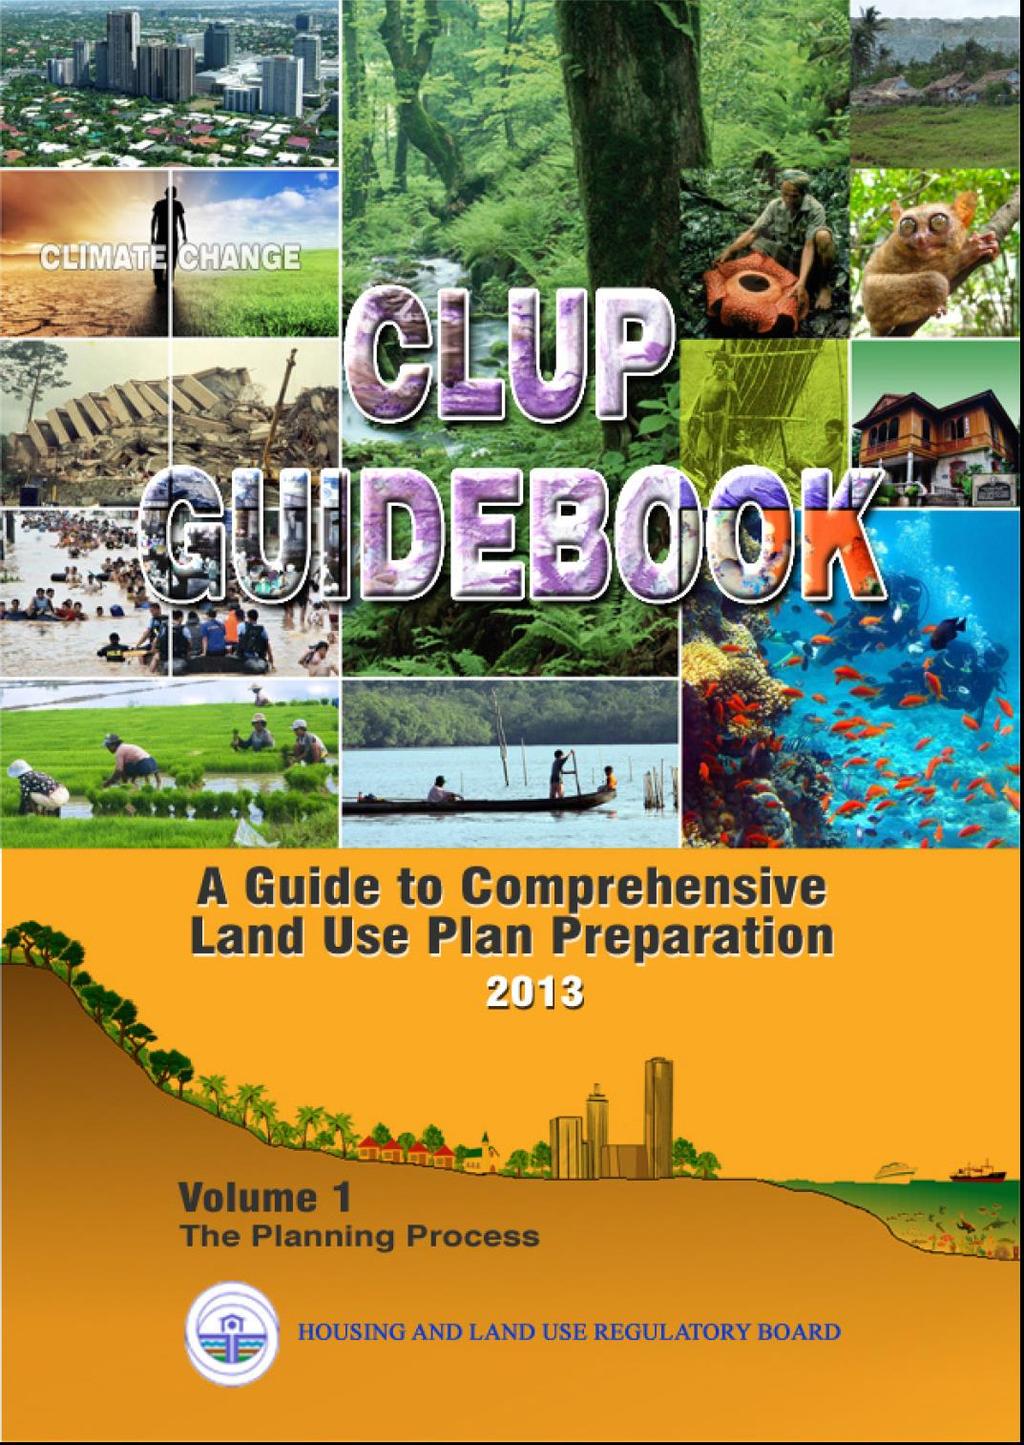 The enhanced CLUP Guidebook advocates the principles